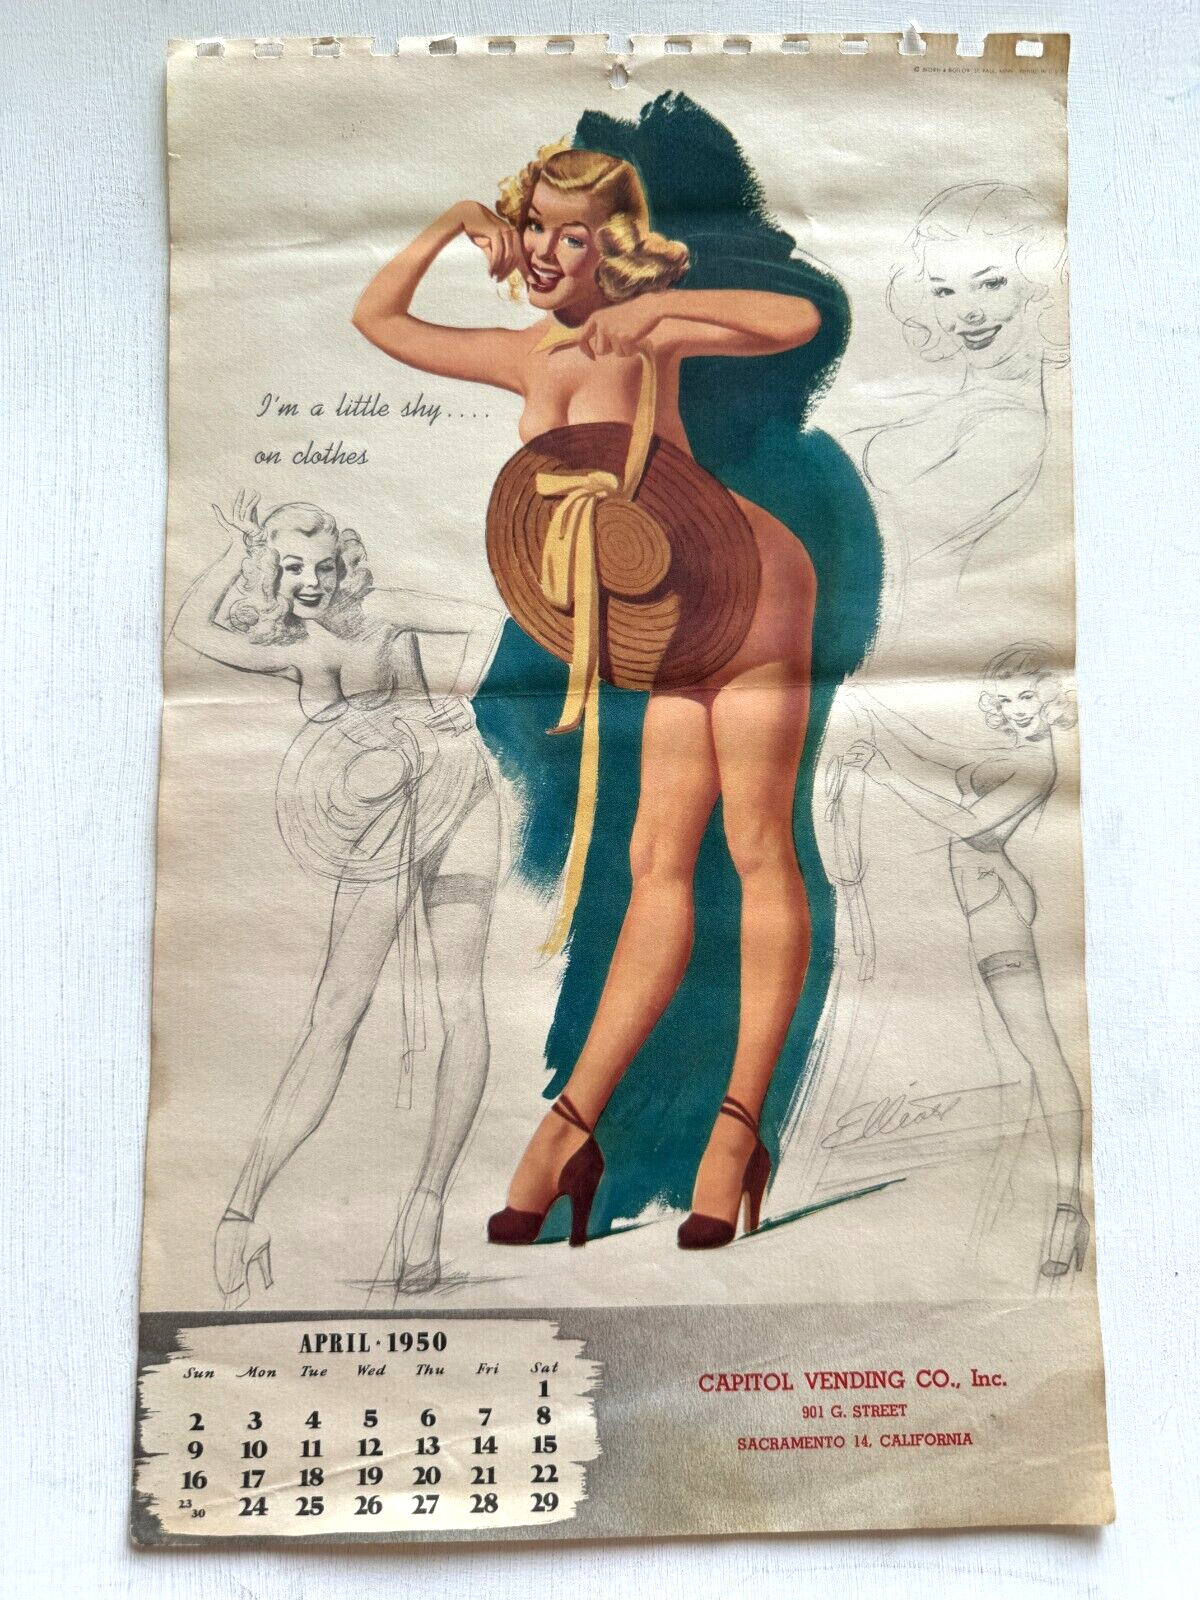 April 1950 Pinup Girl Calendar Page by Elliott- A Little Shy on Clothes